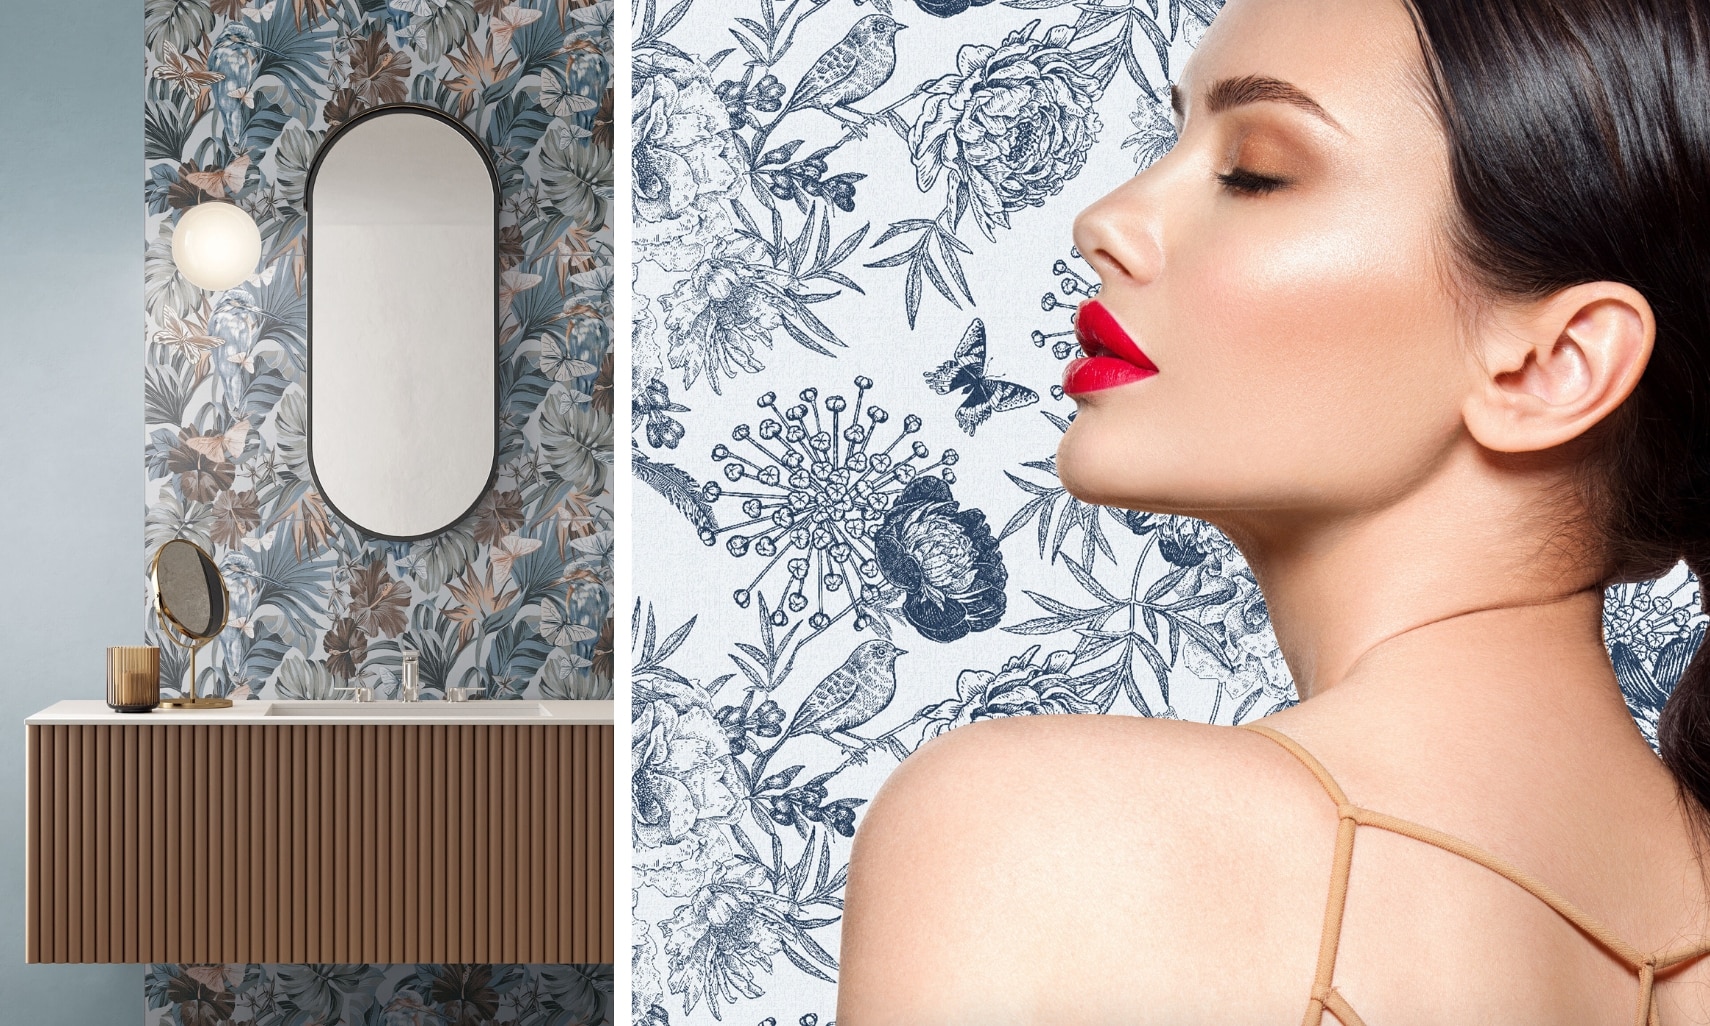 Collage of a bathroom backsplash with blue, brown, and gray wall tile with images of tropical flowers and animals, and a woman in front of a white tile with blue sketches.